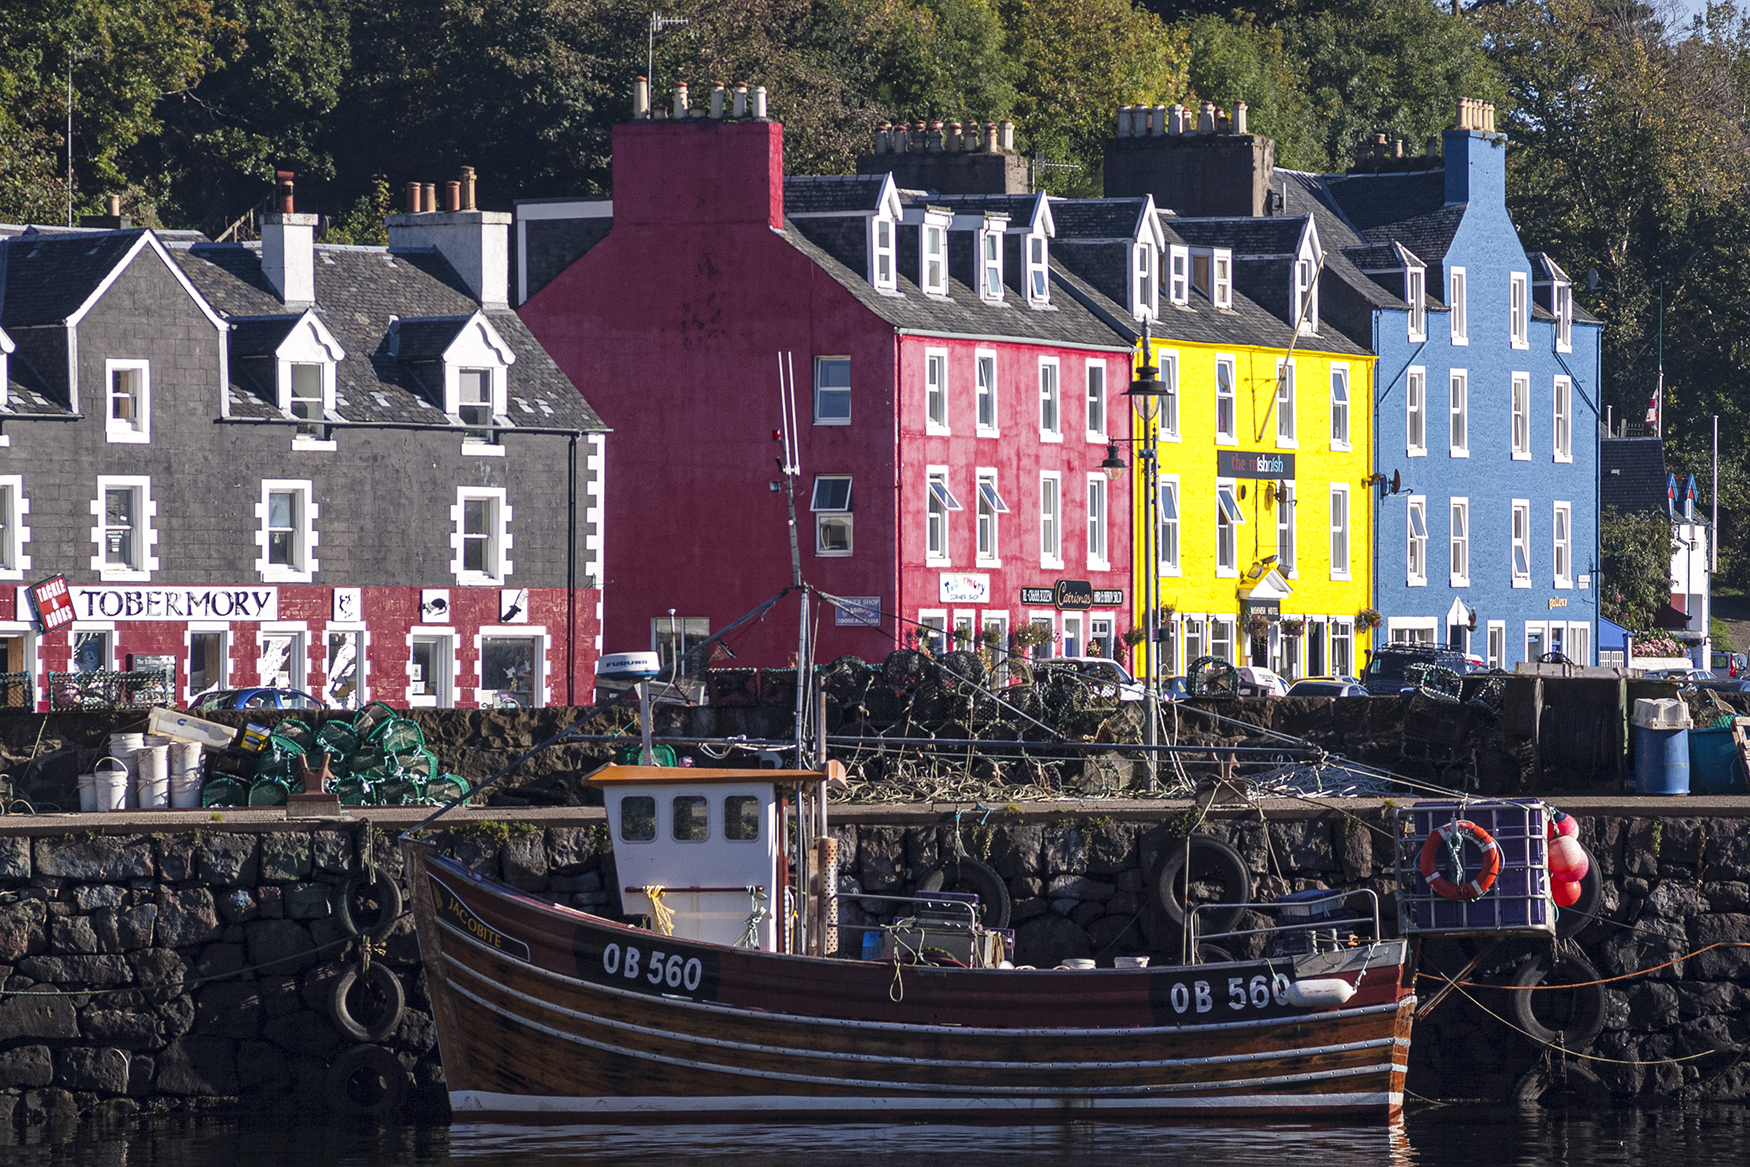 The classic view of the brightly painted waterfront buildings at Tobermory on the Isle of Mull.